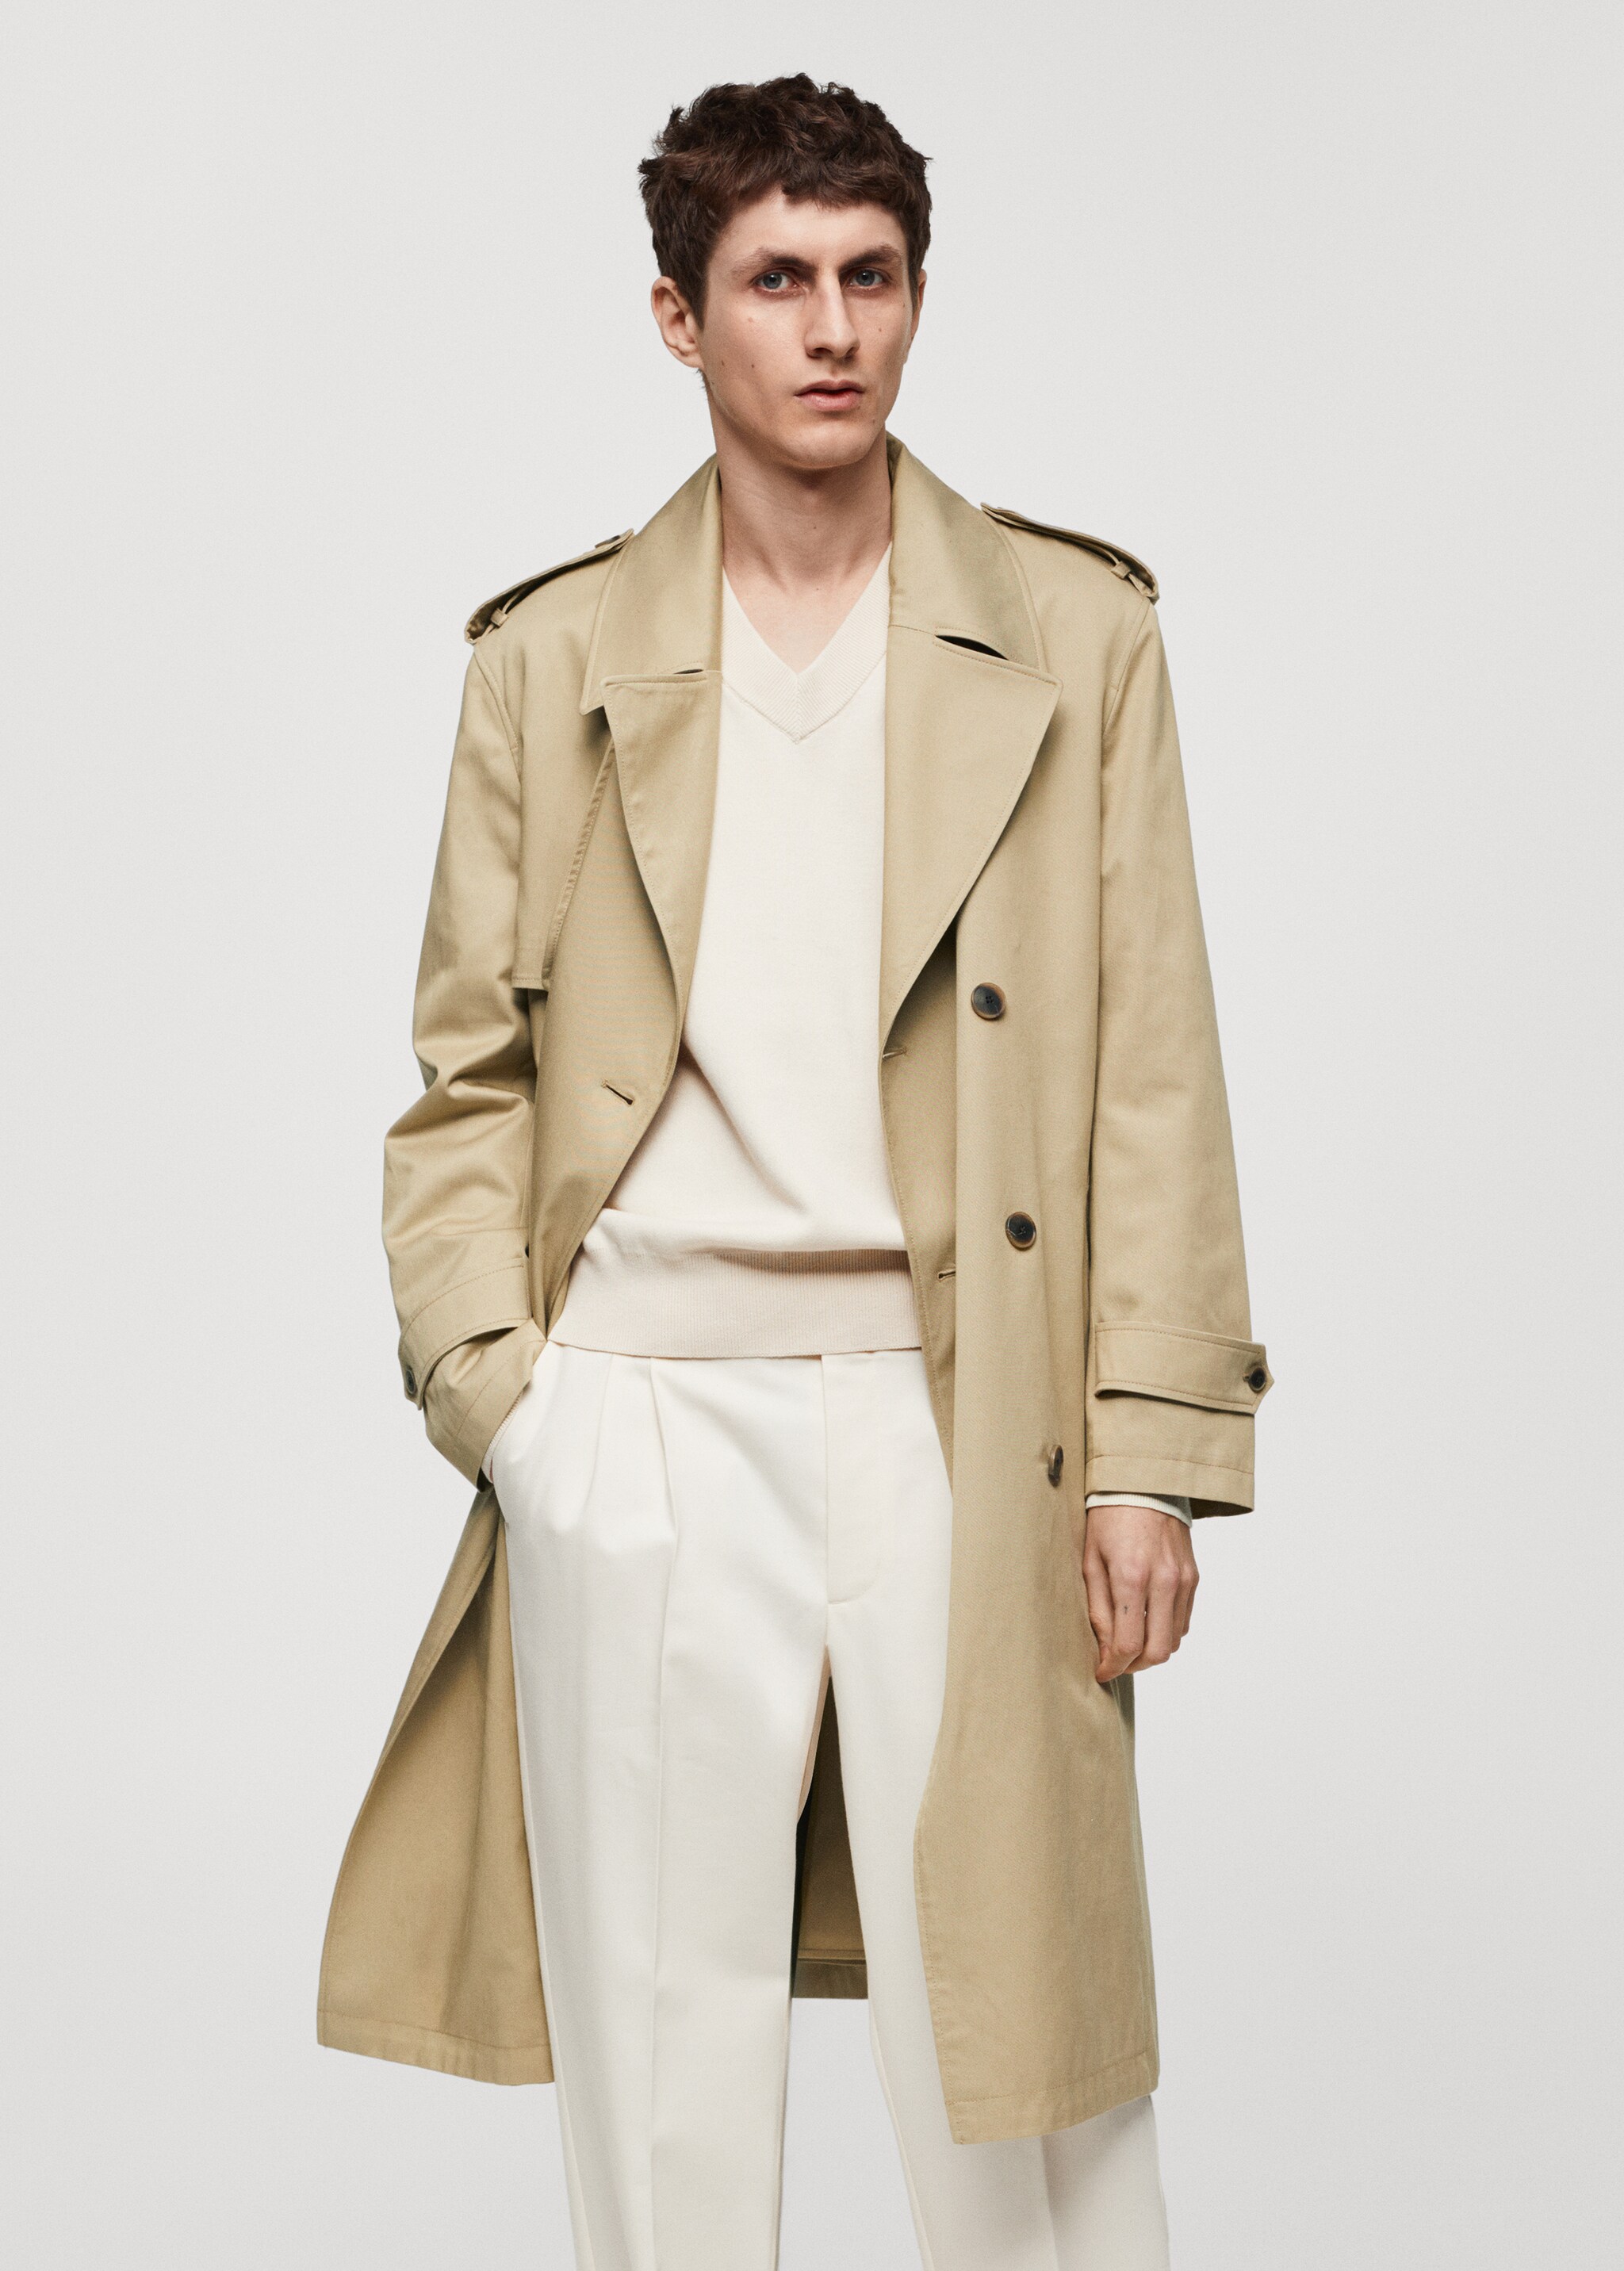 Relaxed fit trench trench coat with belt - Medium plane